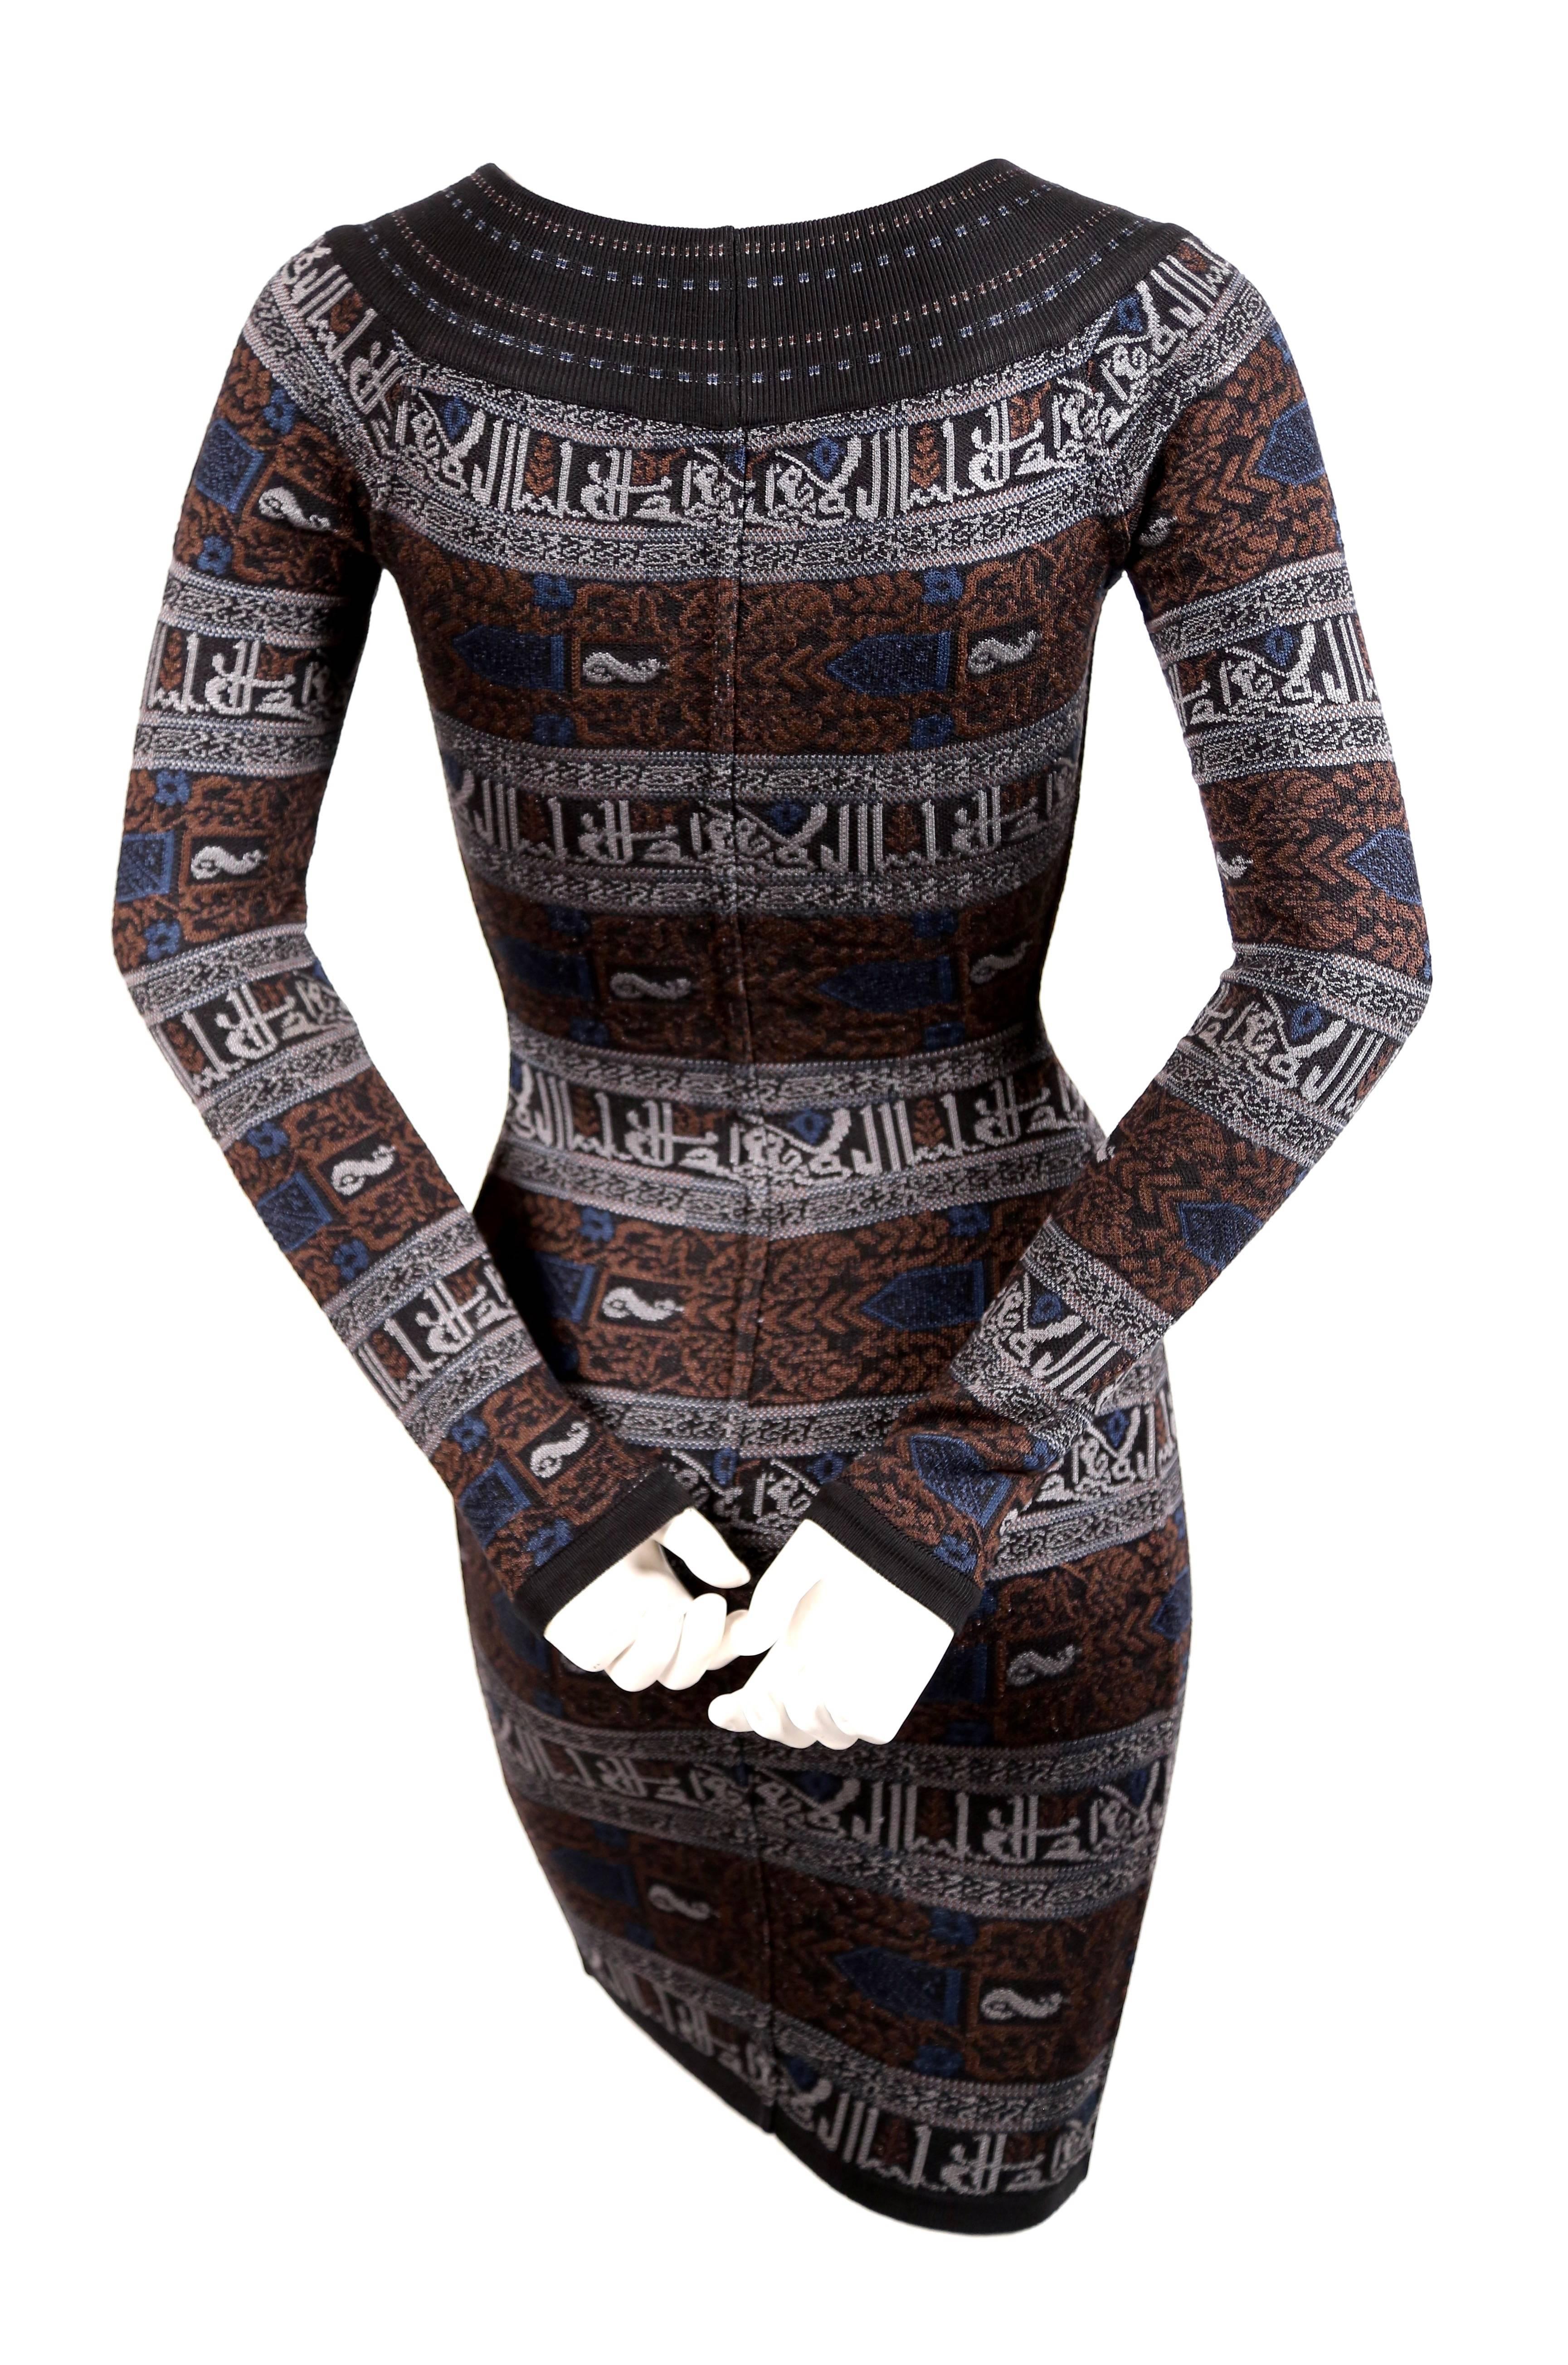 Black Alaia dress with Arabic calligraphy in the Kufic script, 1990 